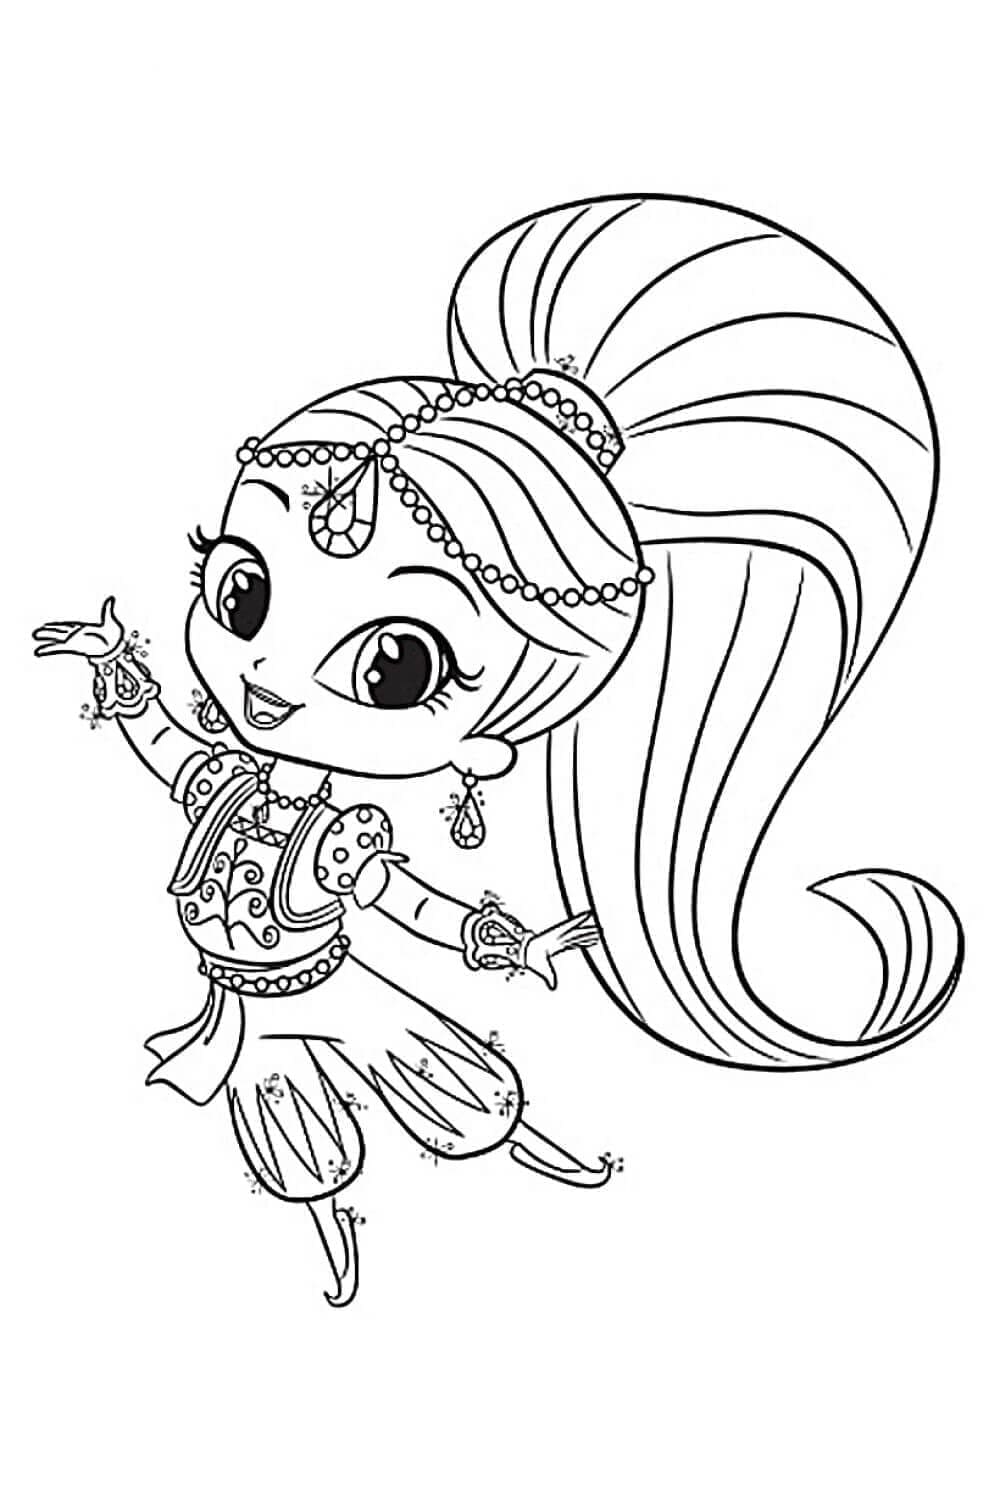 Happy Shimmer coloring page - Download, Print or Color Online for Free